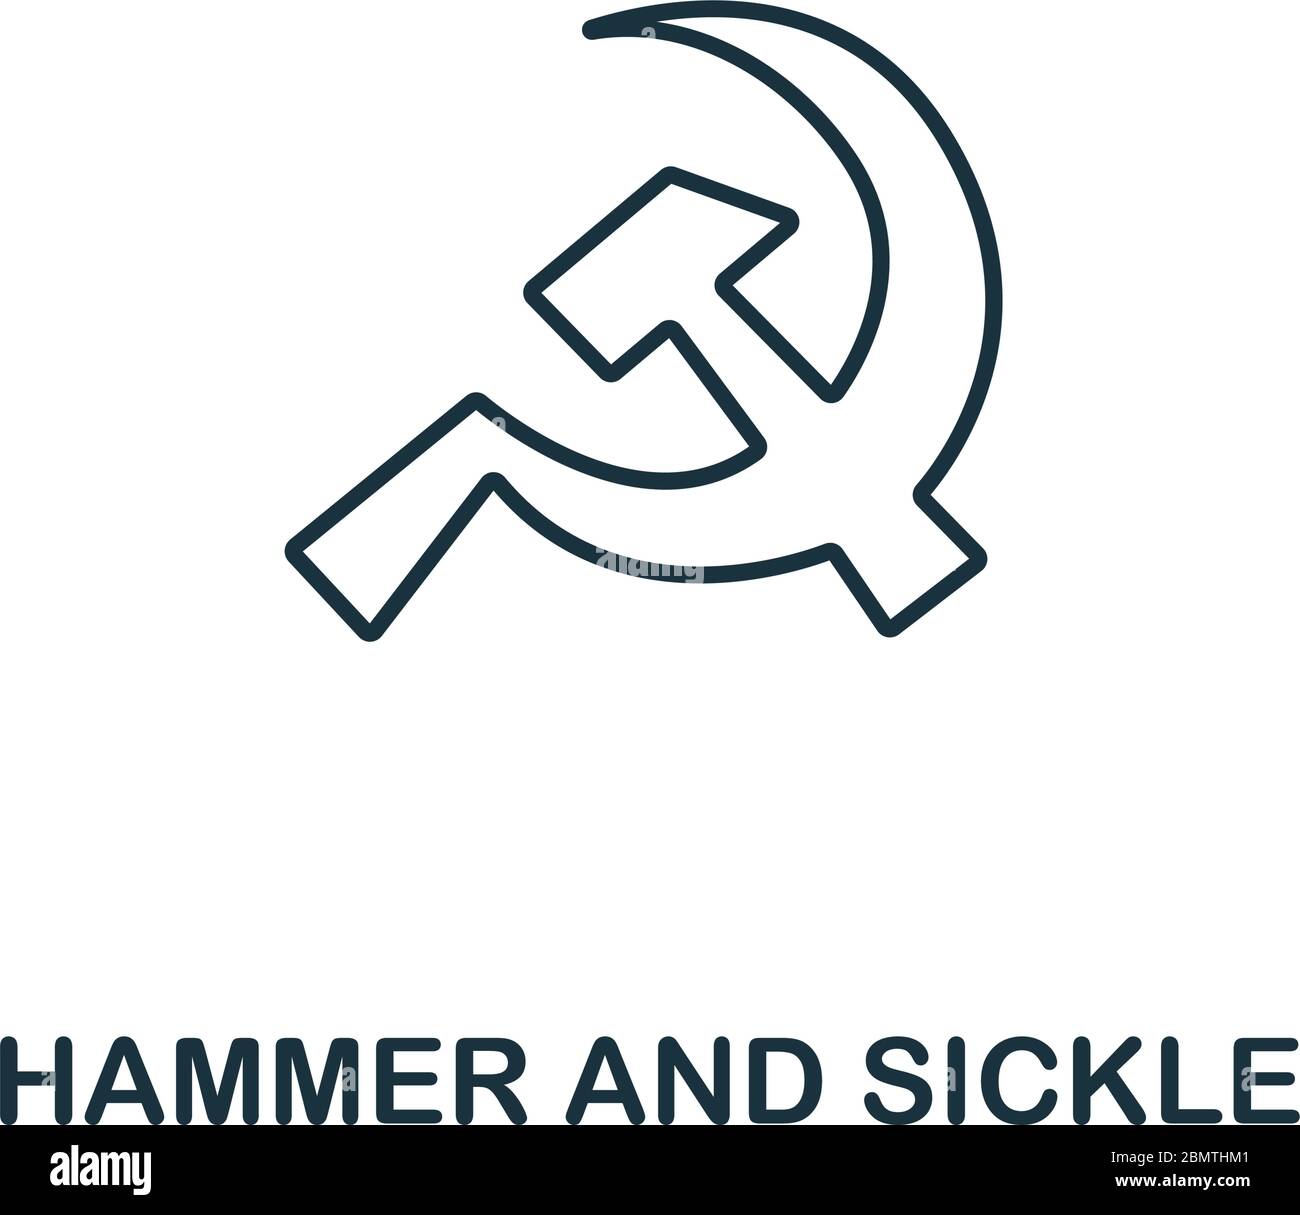 Hammer And Sickle Design